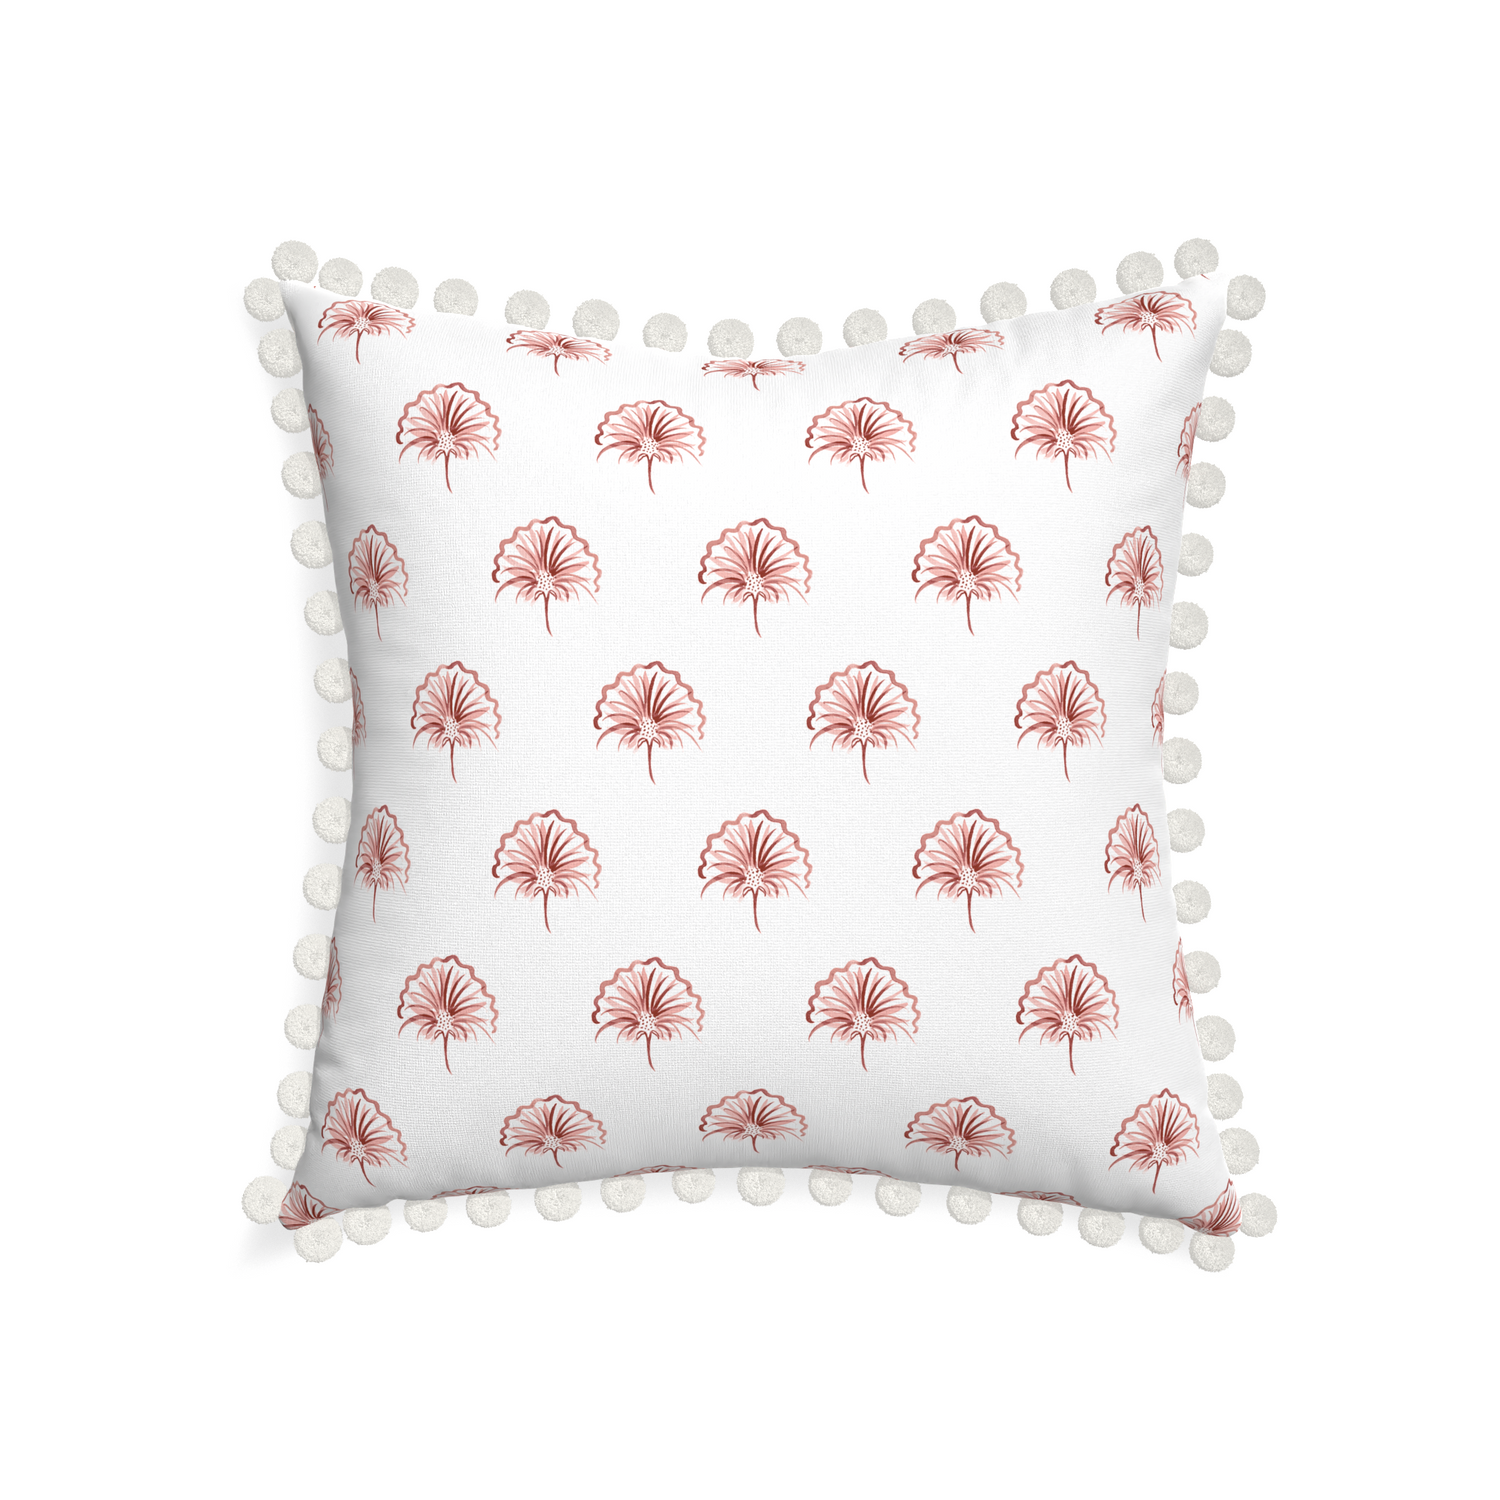 22-square penelope rose custom floral pinkpillow with snow pom pom on white background